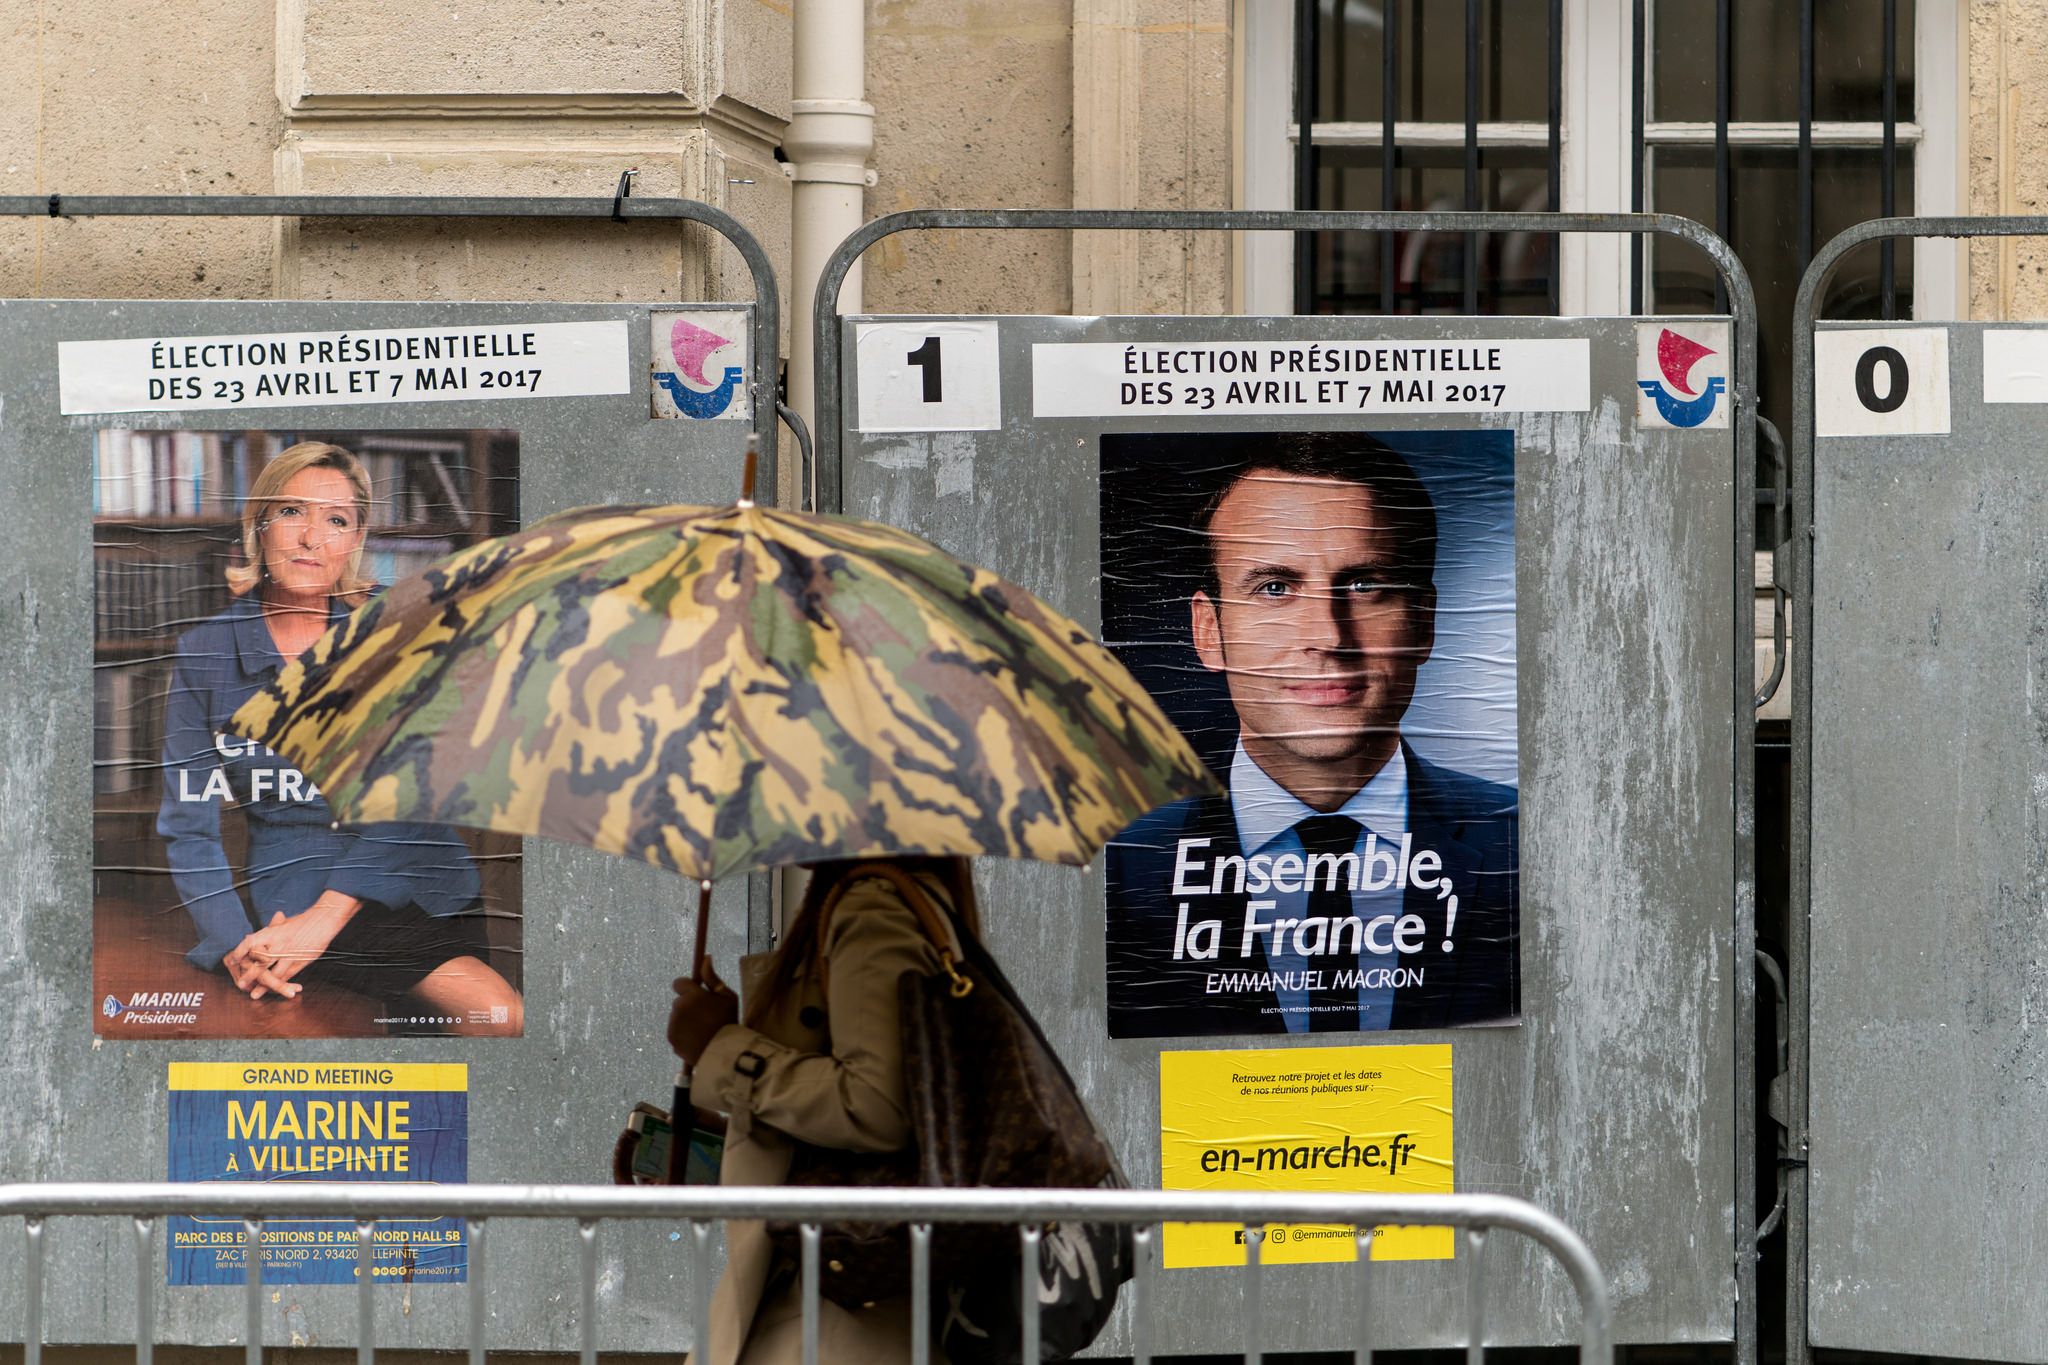 Posters promoting candidates in the 2017 French presidential election, Marine Le Pen and Emmanuel Macron. Image by Lorie Shaull. France, 2017.